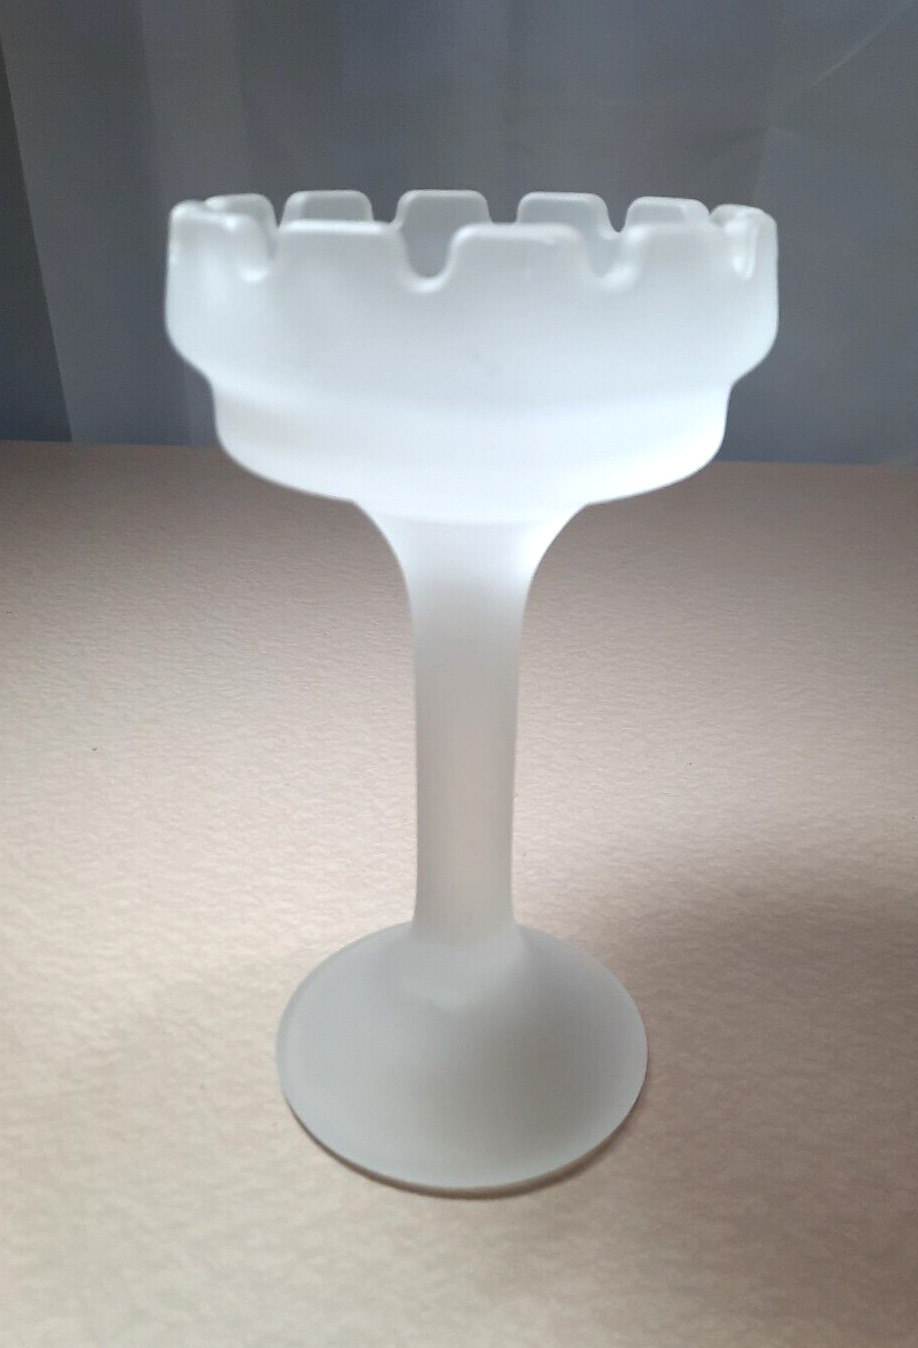 PartyLite Clairmont Fairy Lamp Pedestal ONLY Tall Frosted Glass Candle Holder